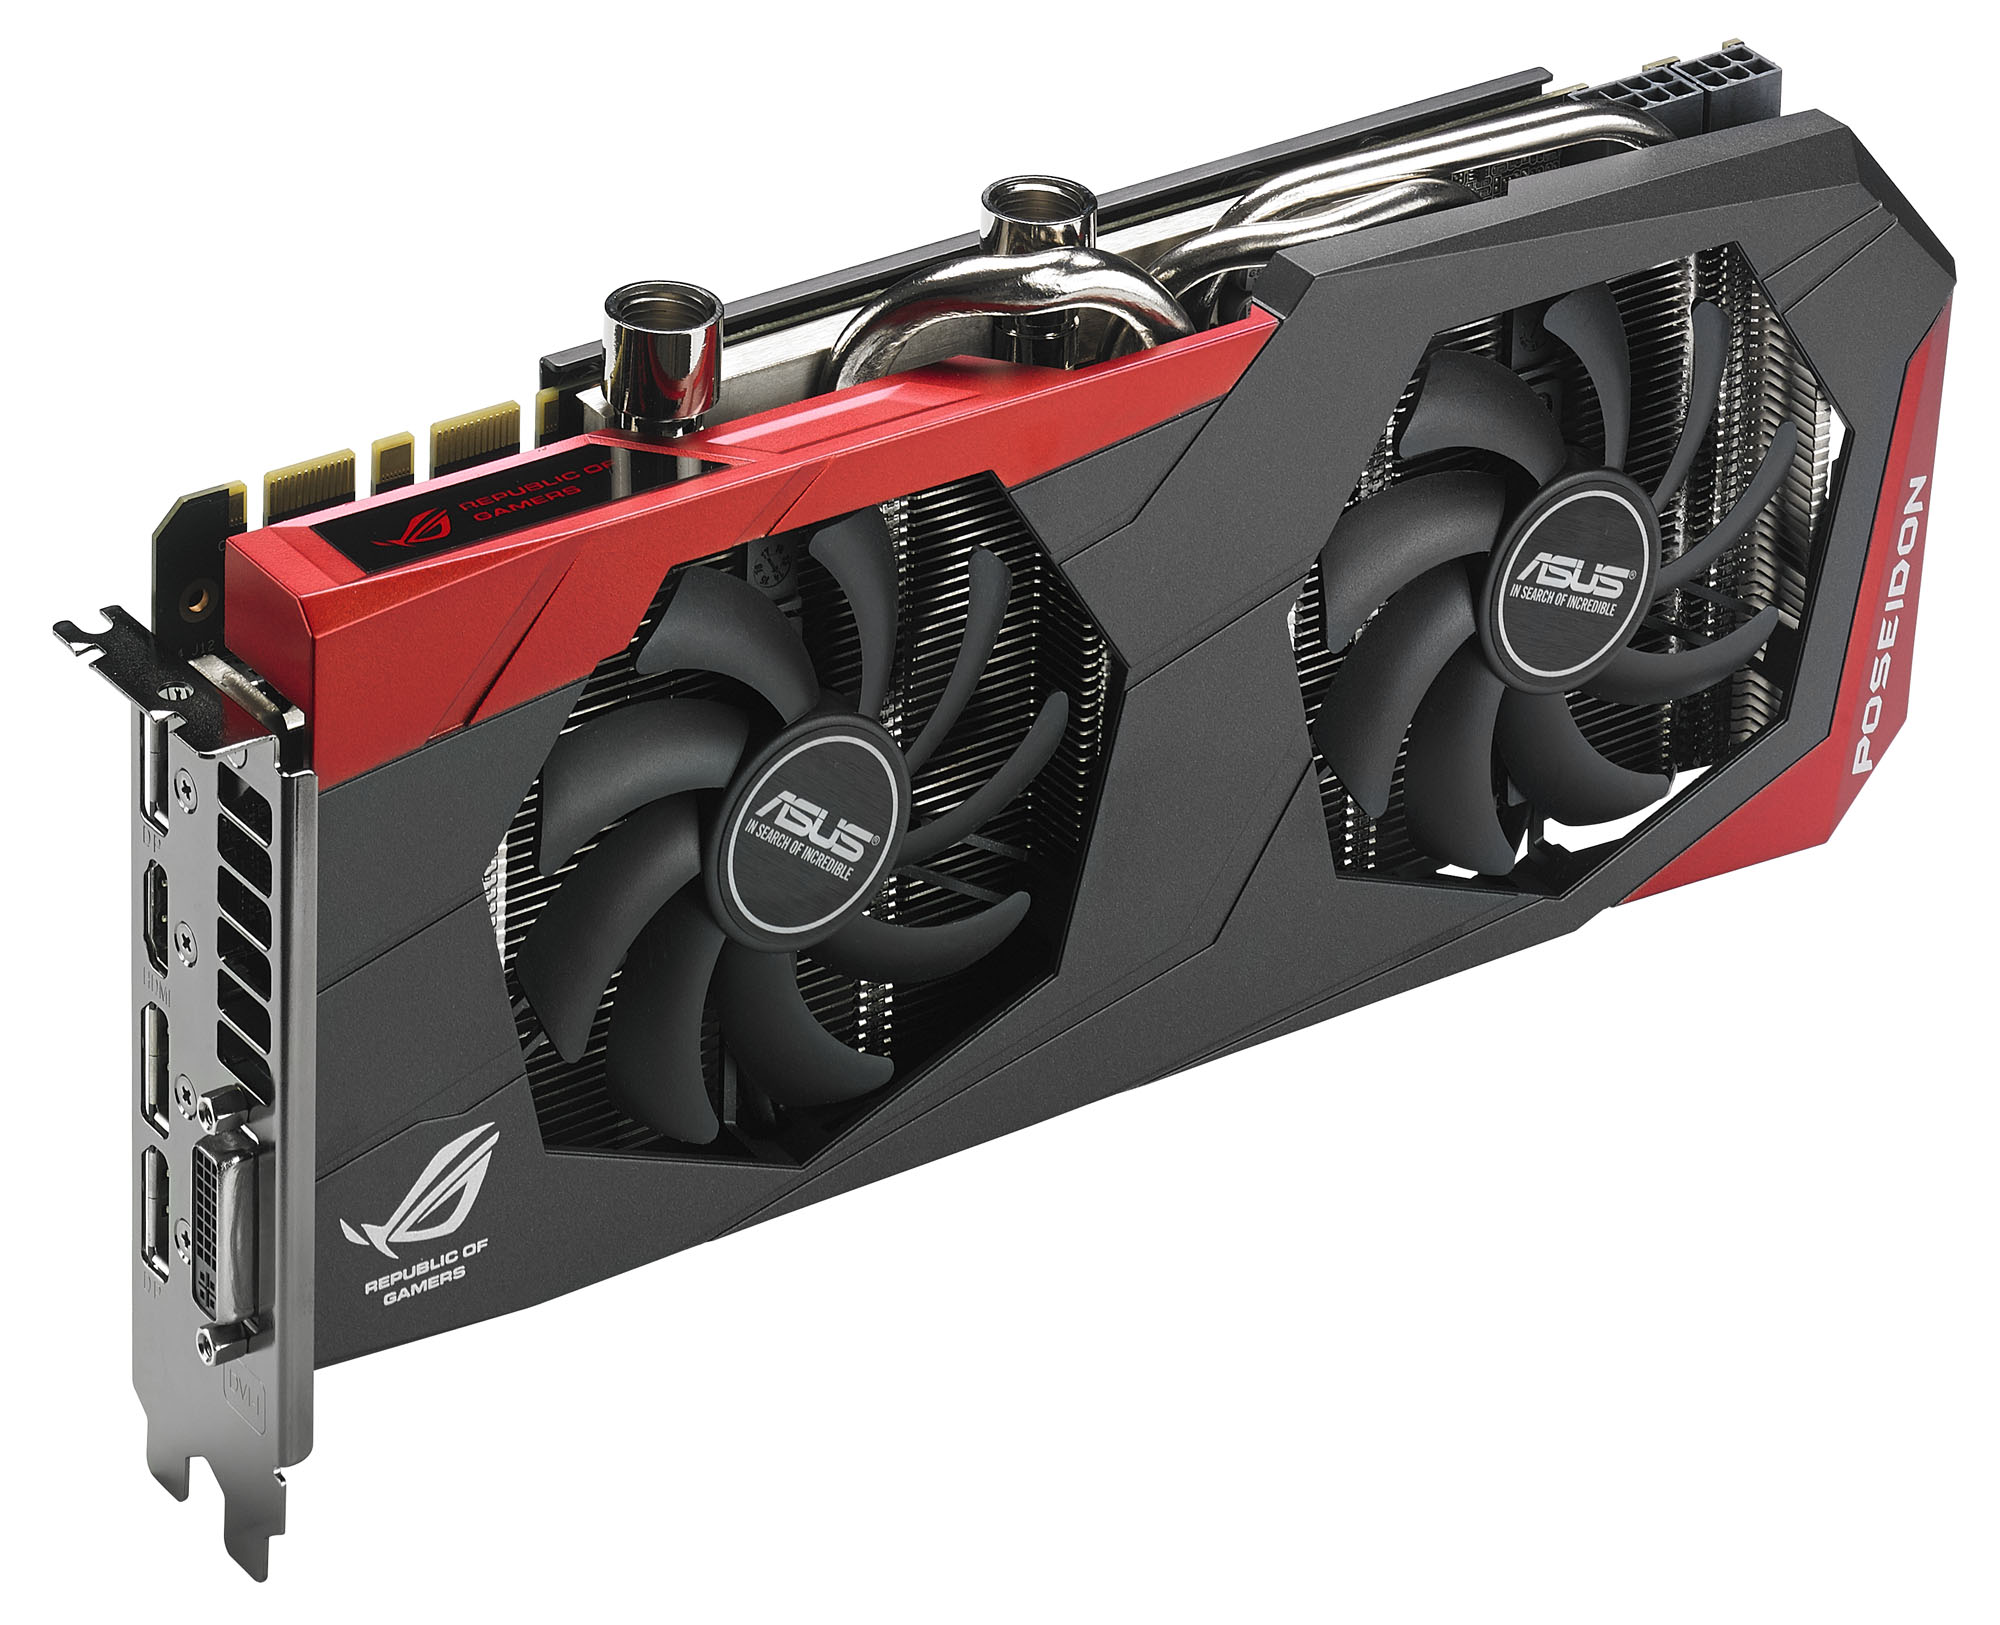 Asus Rog Poseidon Gtx 980 Video Card Pictured Legit Reviews Exclusive Directcu H2o Technology For Up To 2x Cooler And 3x Quieter Performance